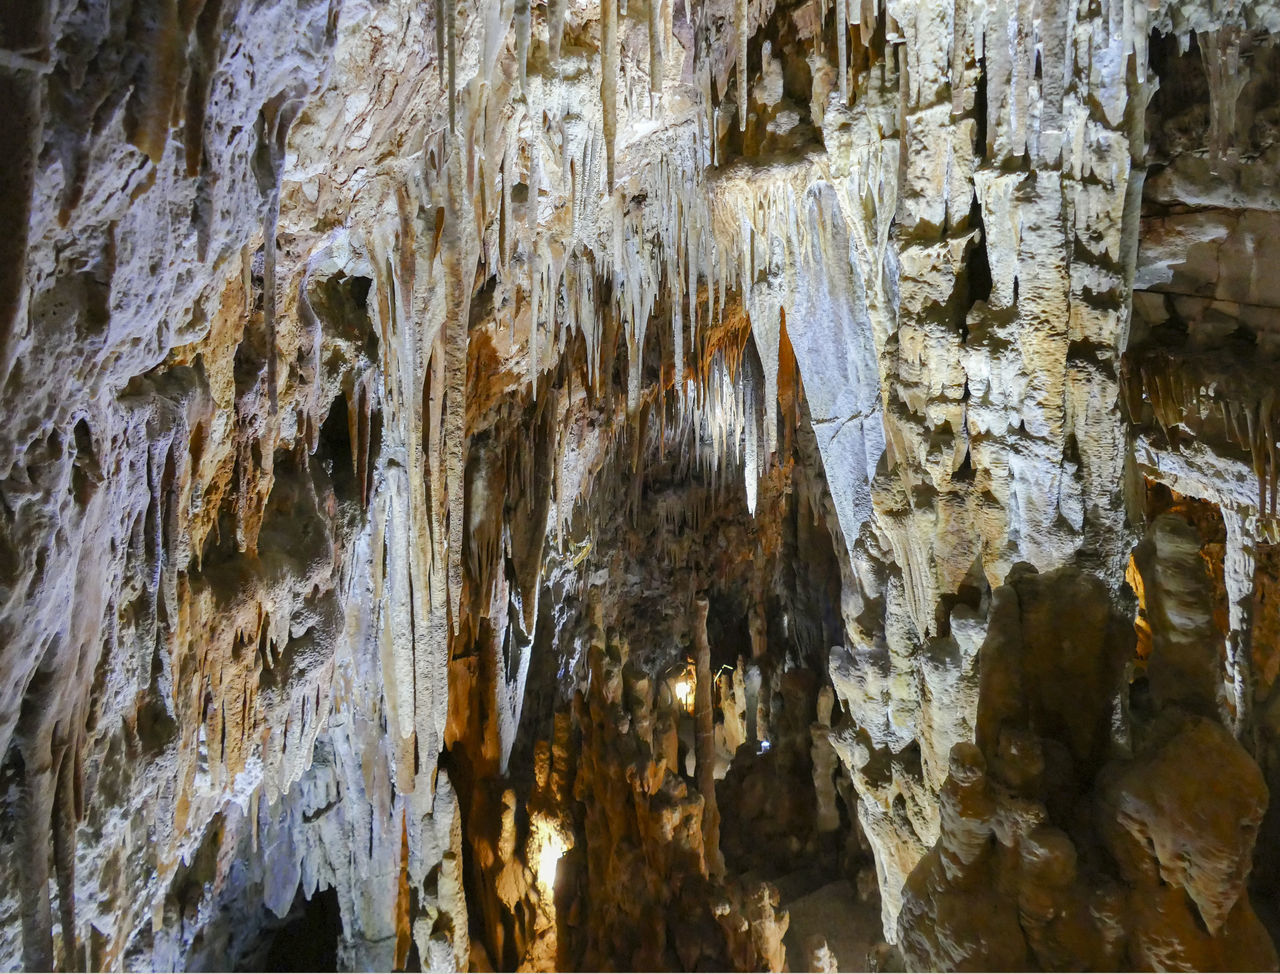 stalactite, rock, stalagmite, cave, no people, geology, speleothem, beauty in nature, nature, rock formation, physical geography, pattern, outdoors, day, limestone, textured, formation